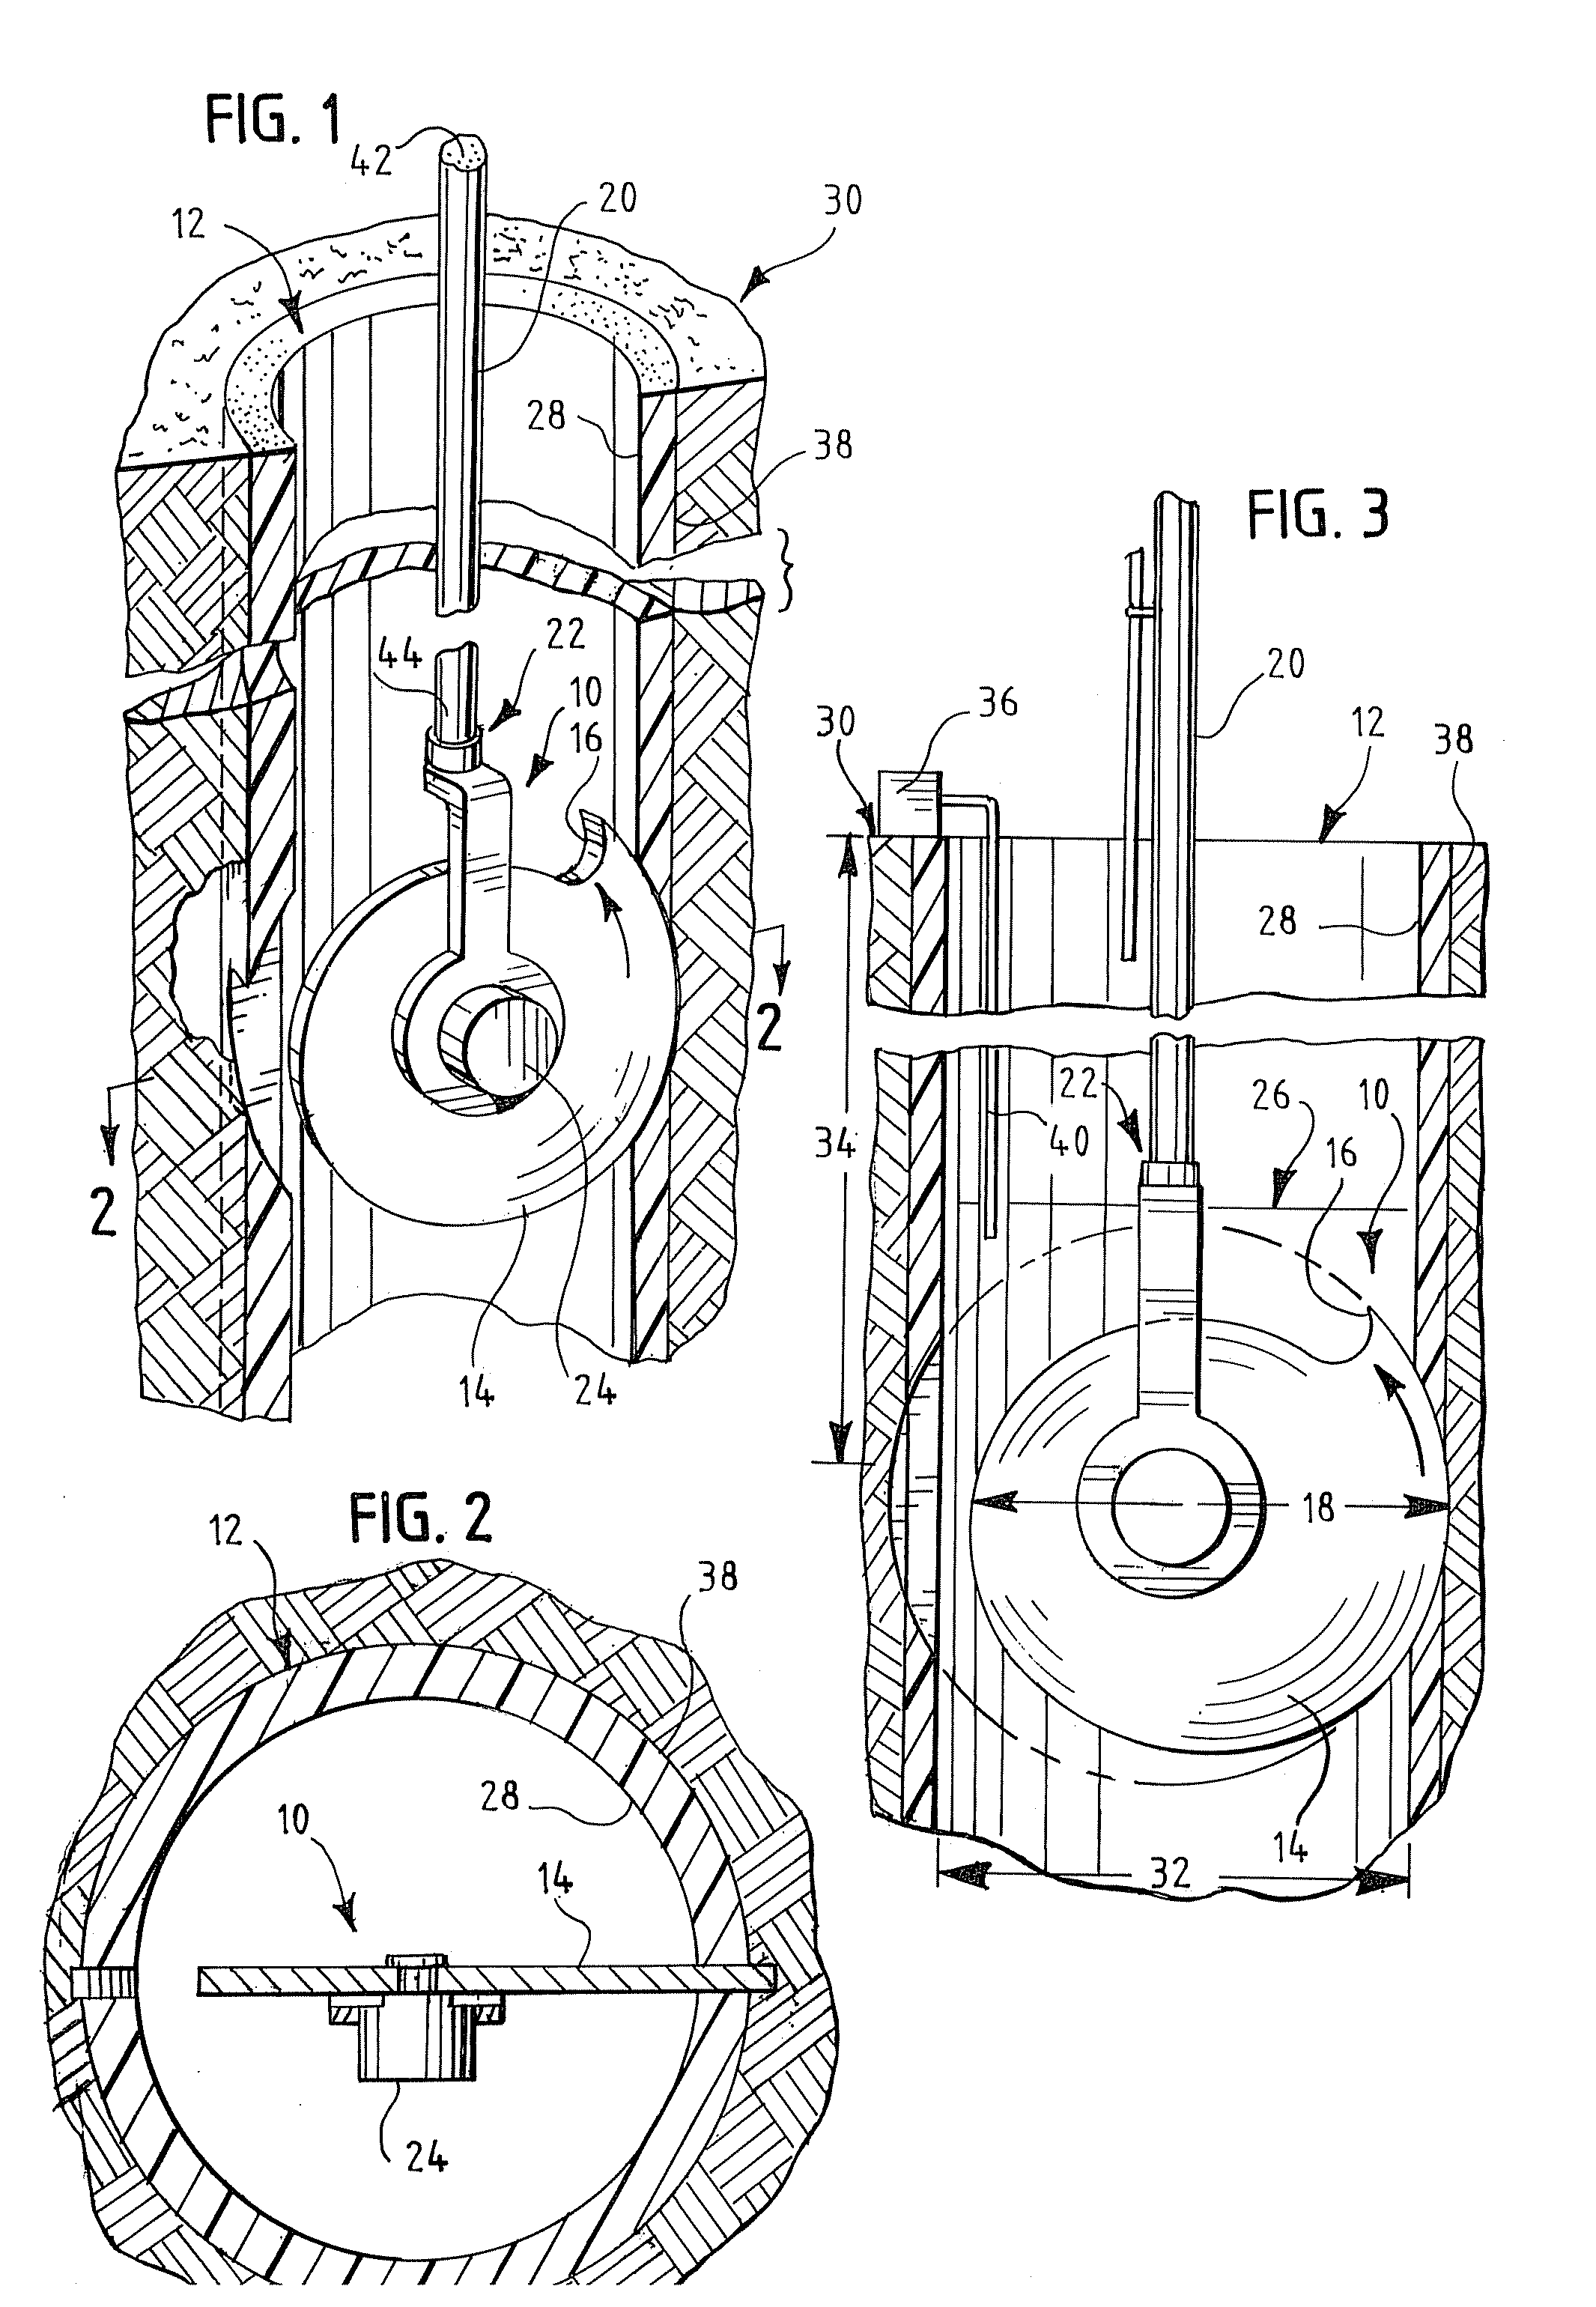 In-situ landfill gas well perforation method and apparatus